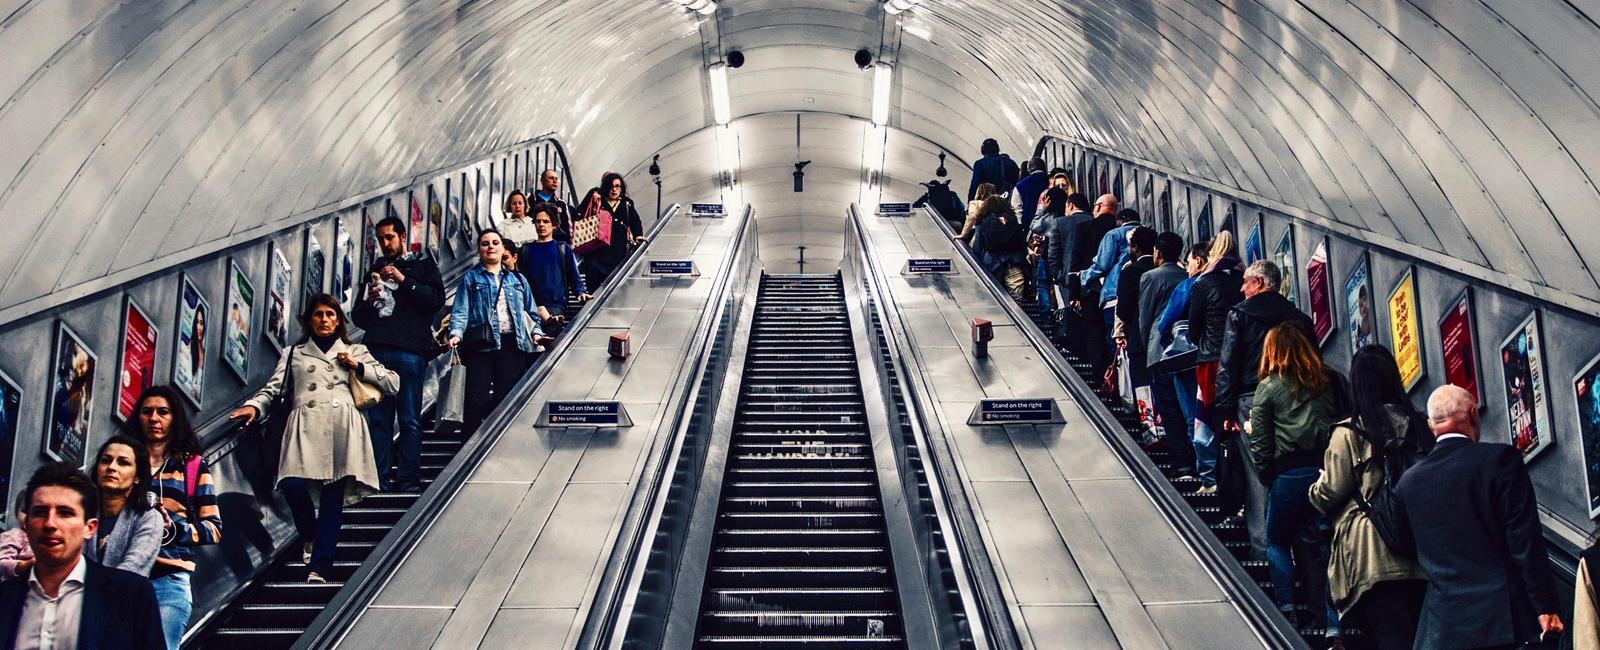 There are 426 escalators in the london underground and they cover a distance every week which equals to two trips around the globe